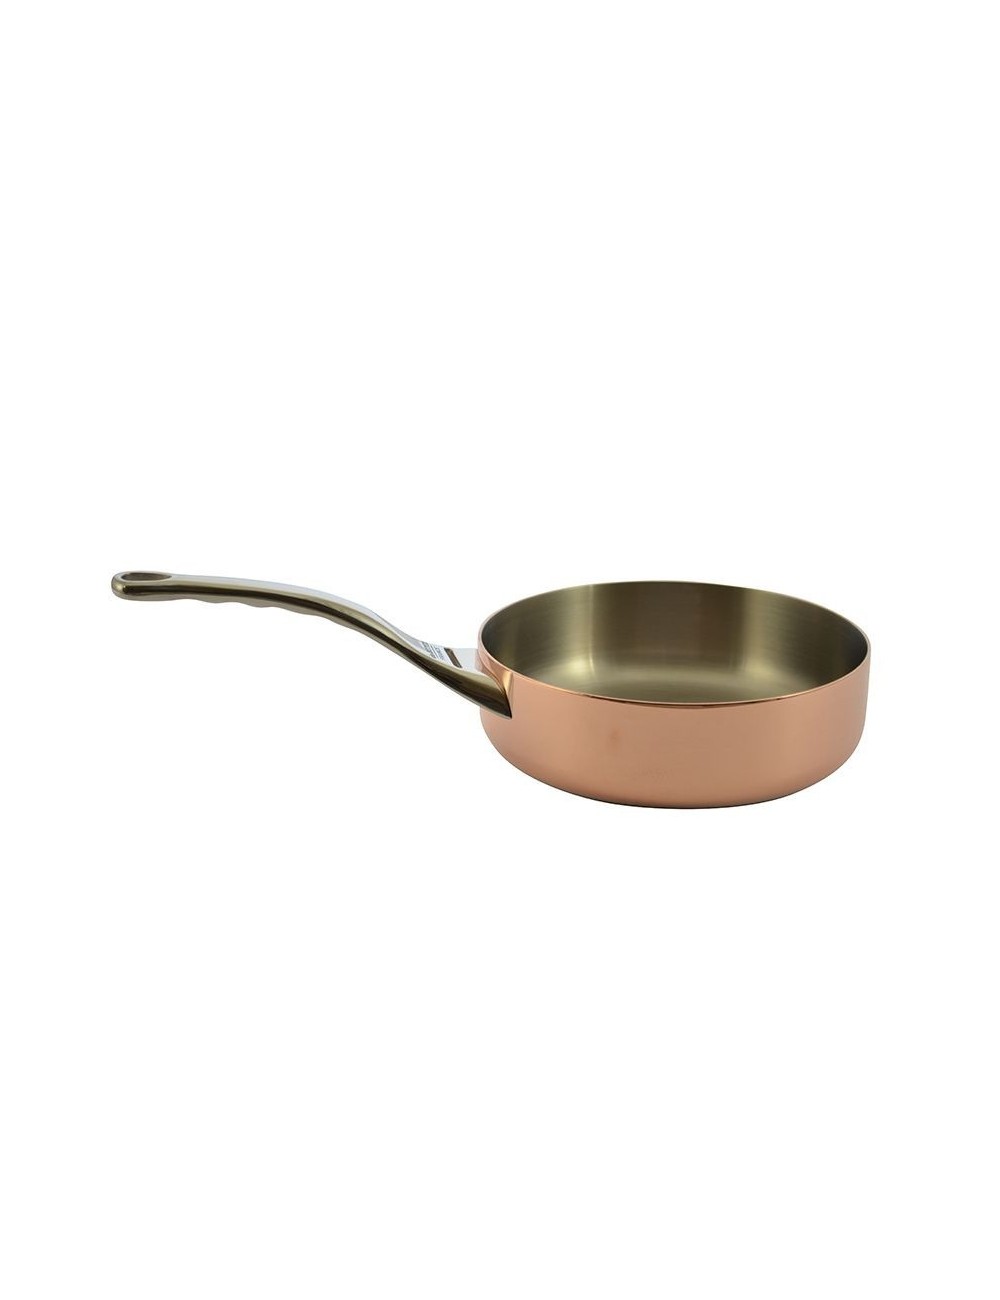 https://www.edehillerin.fr/773-large_default/dish-has-skip-copper-induction-with-tail-stainless-steel.jpg